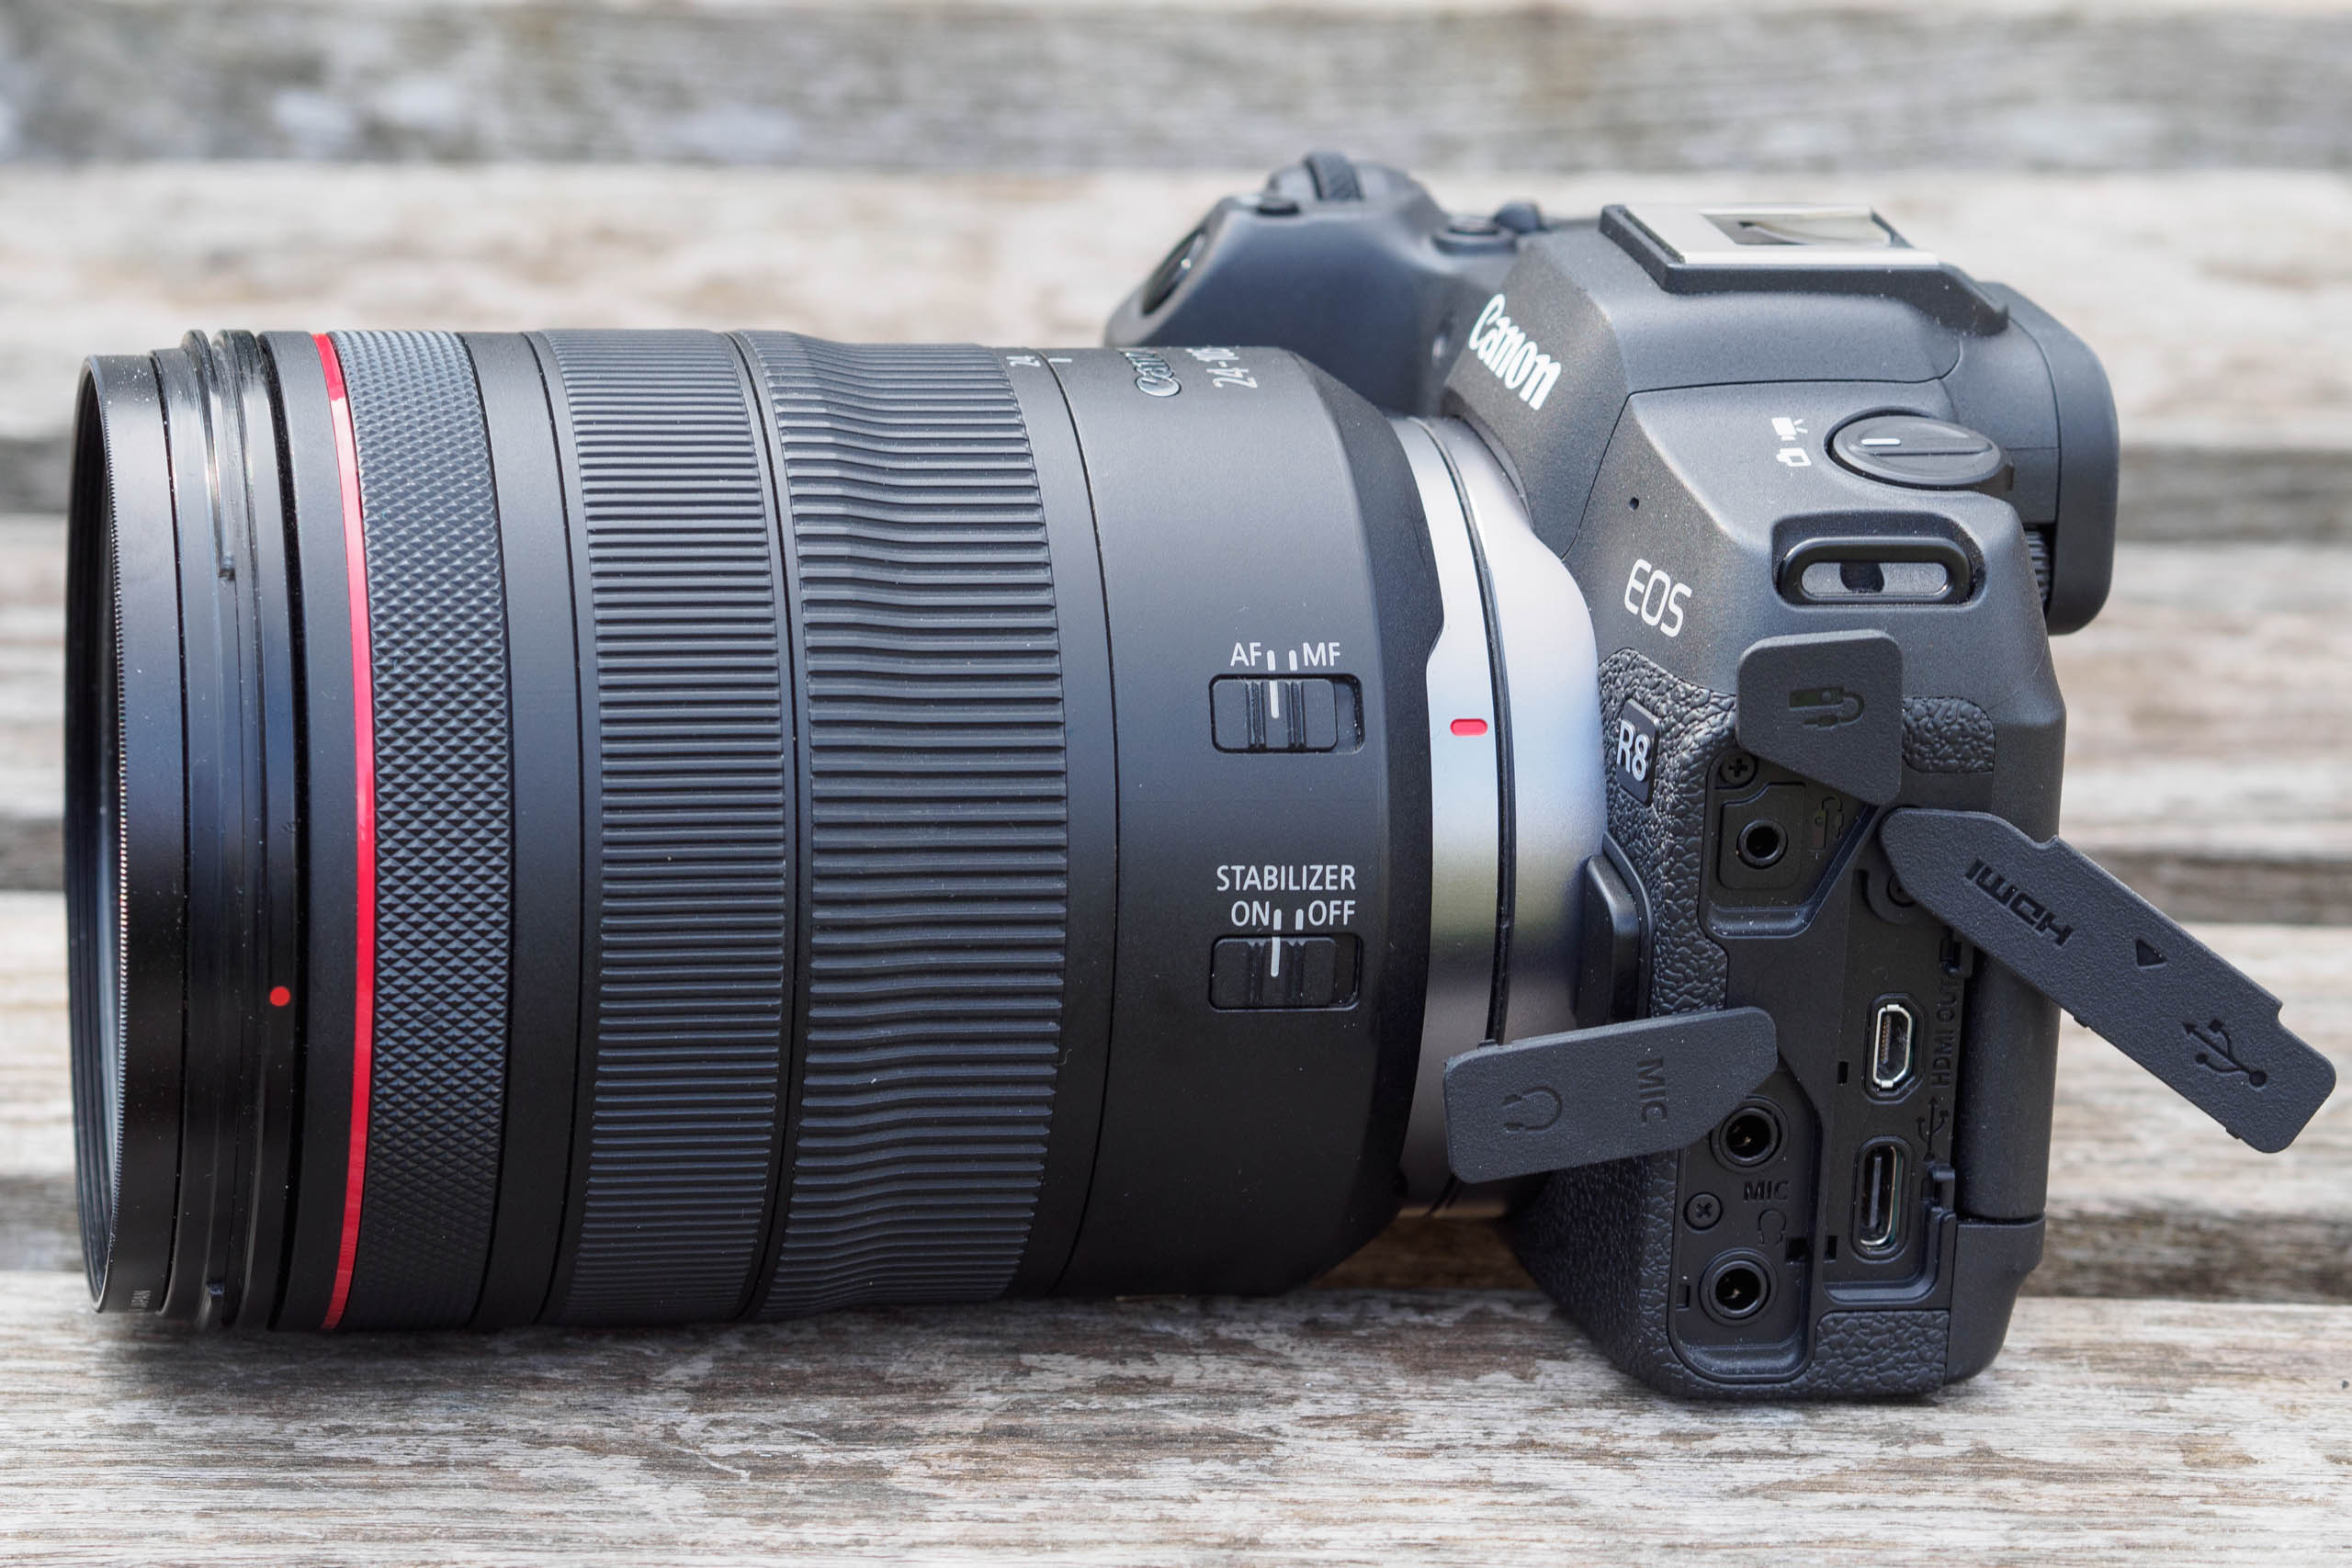 Canon EOS R8 review: A compact hybrid camera for beginners